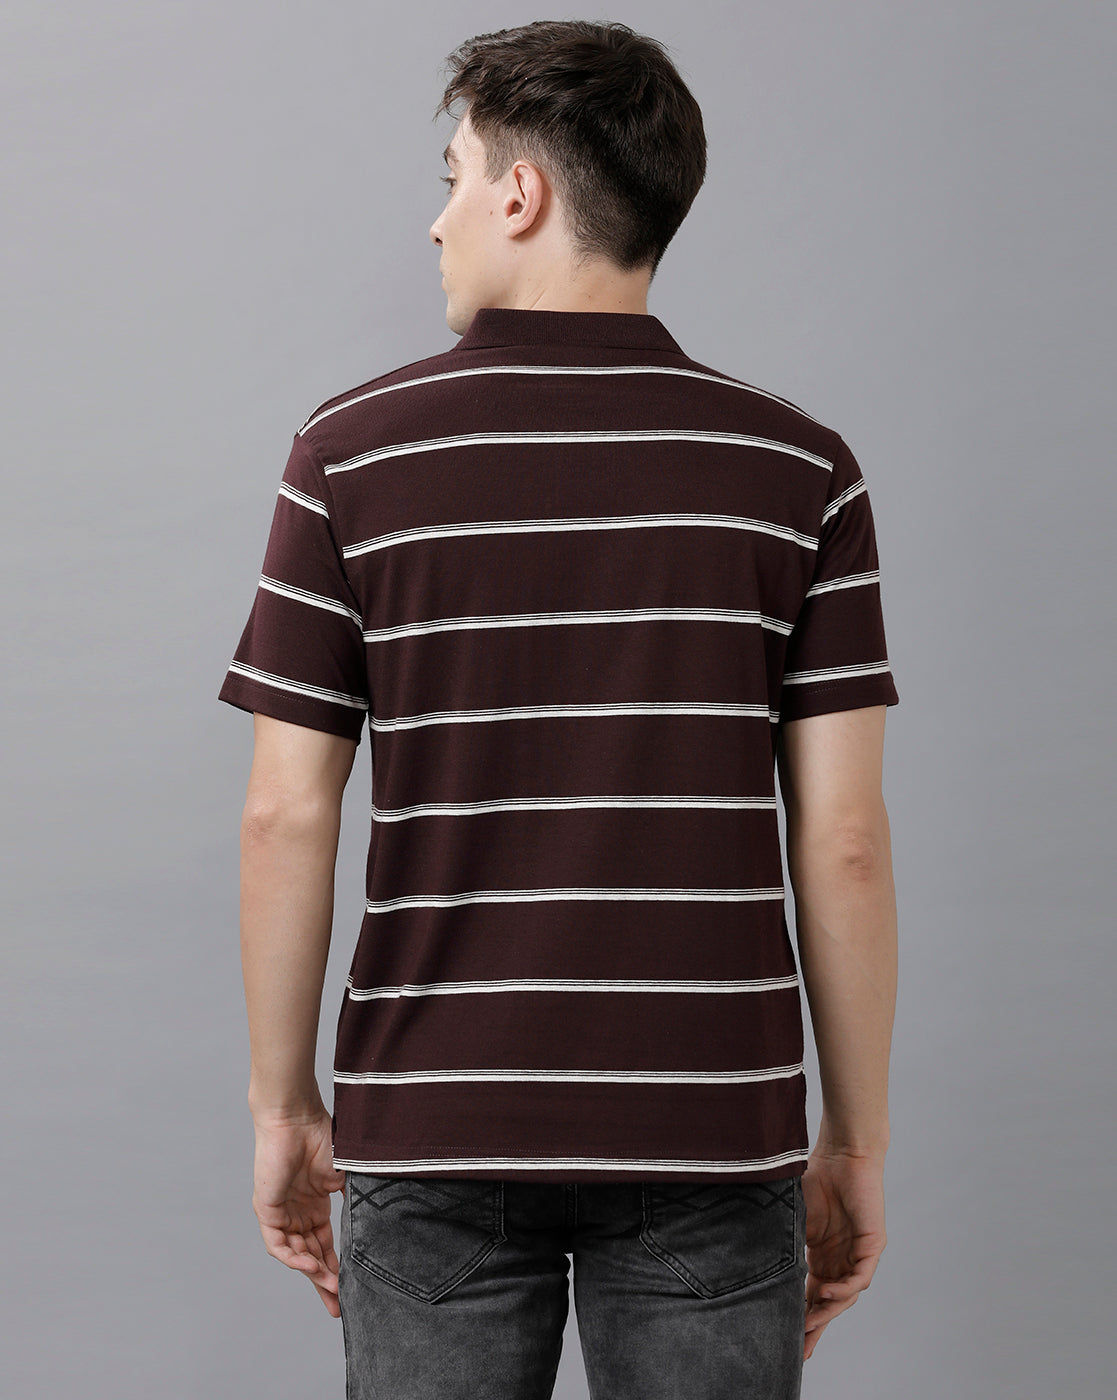 Classic Polo Mens Cotton Blend Striped Half Sleeve Authentic Fit Polo Neck Dark Brown Color T-Shirt | Avon 504 B